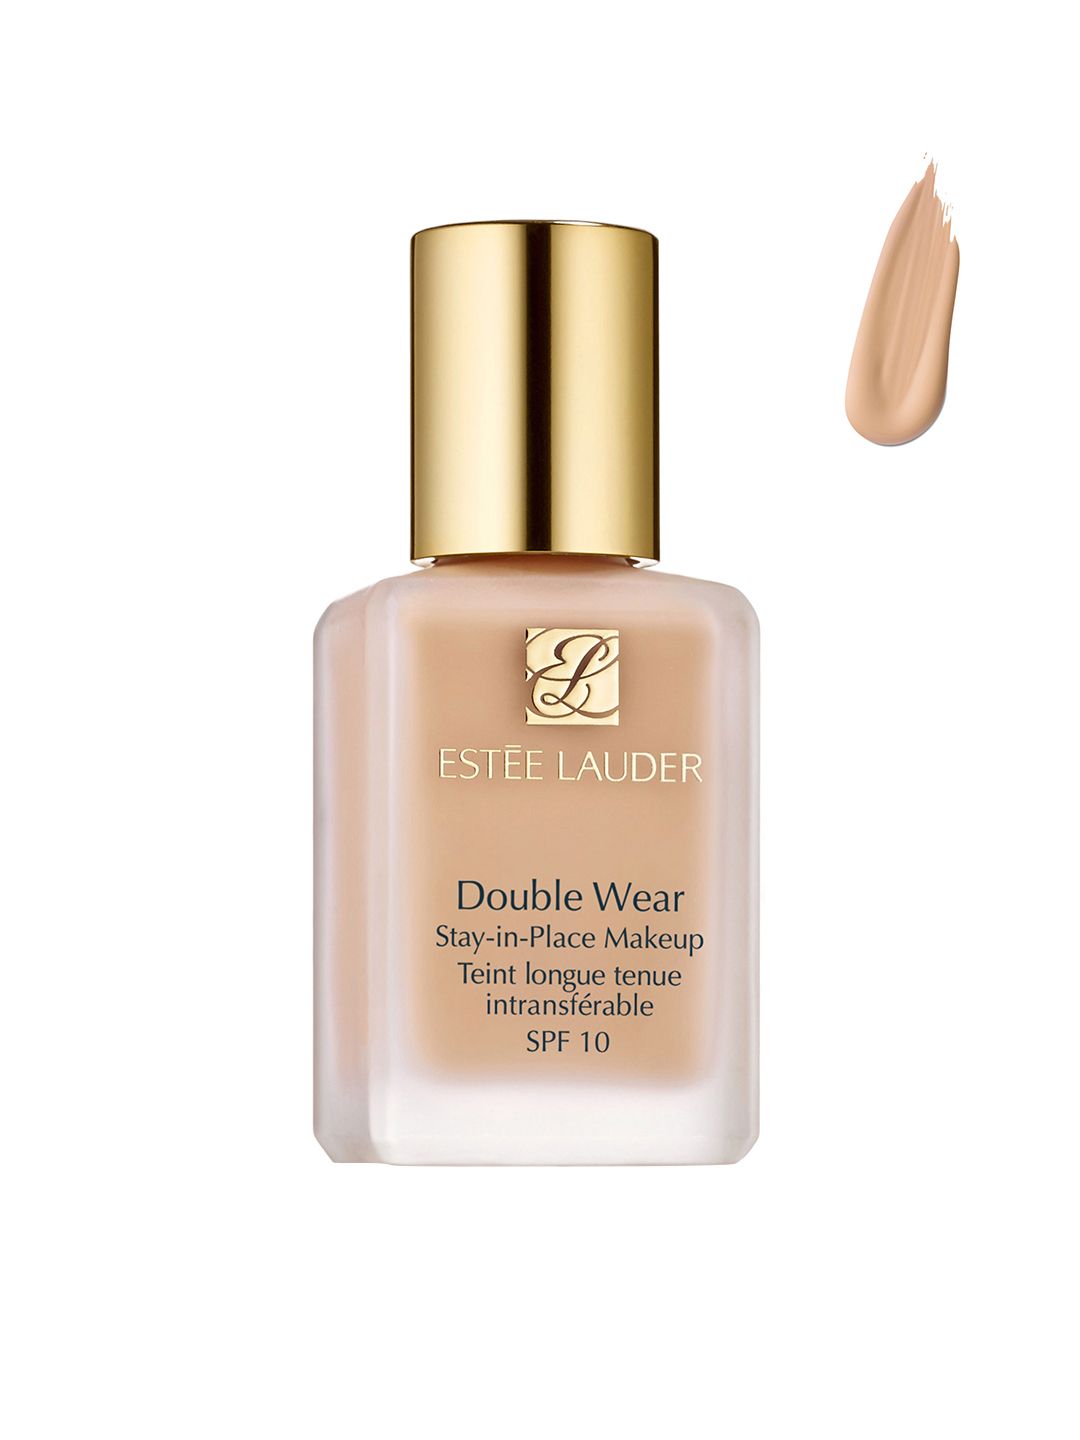 Estee Lauder Shell Double Wear Stay-in-Place Makeup SPF 10 Foundation 30 ml Price in India